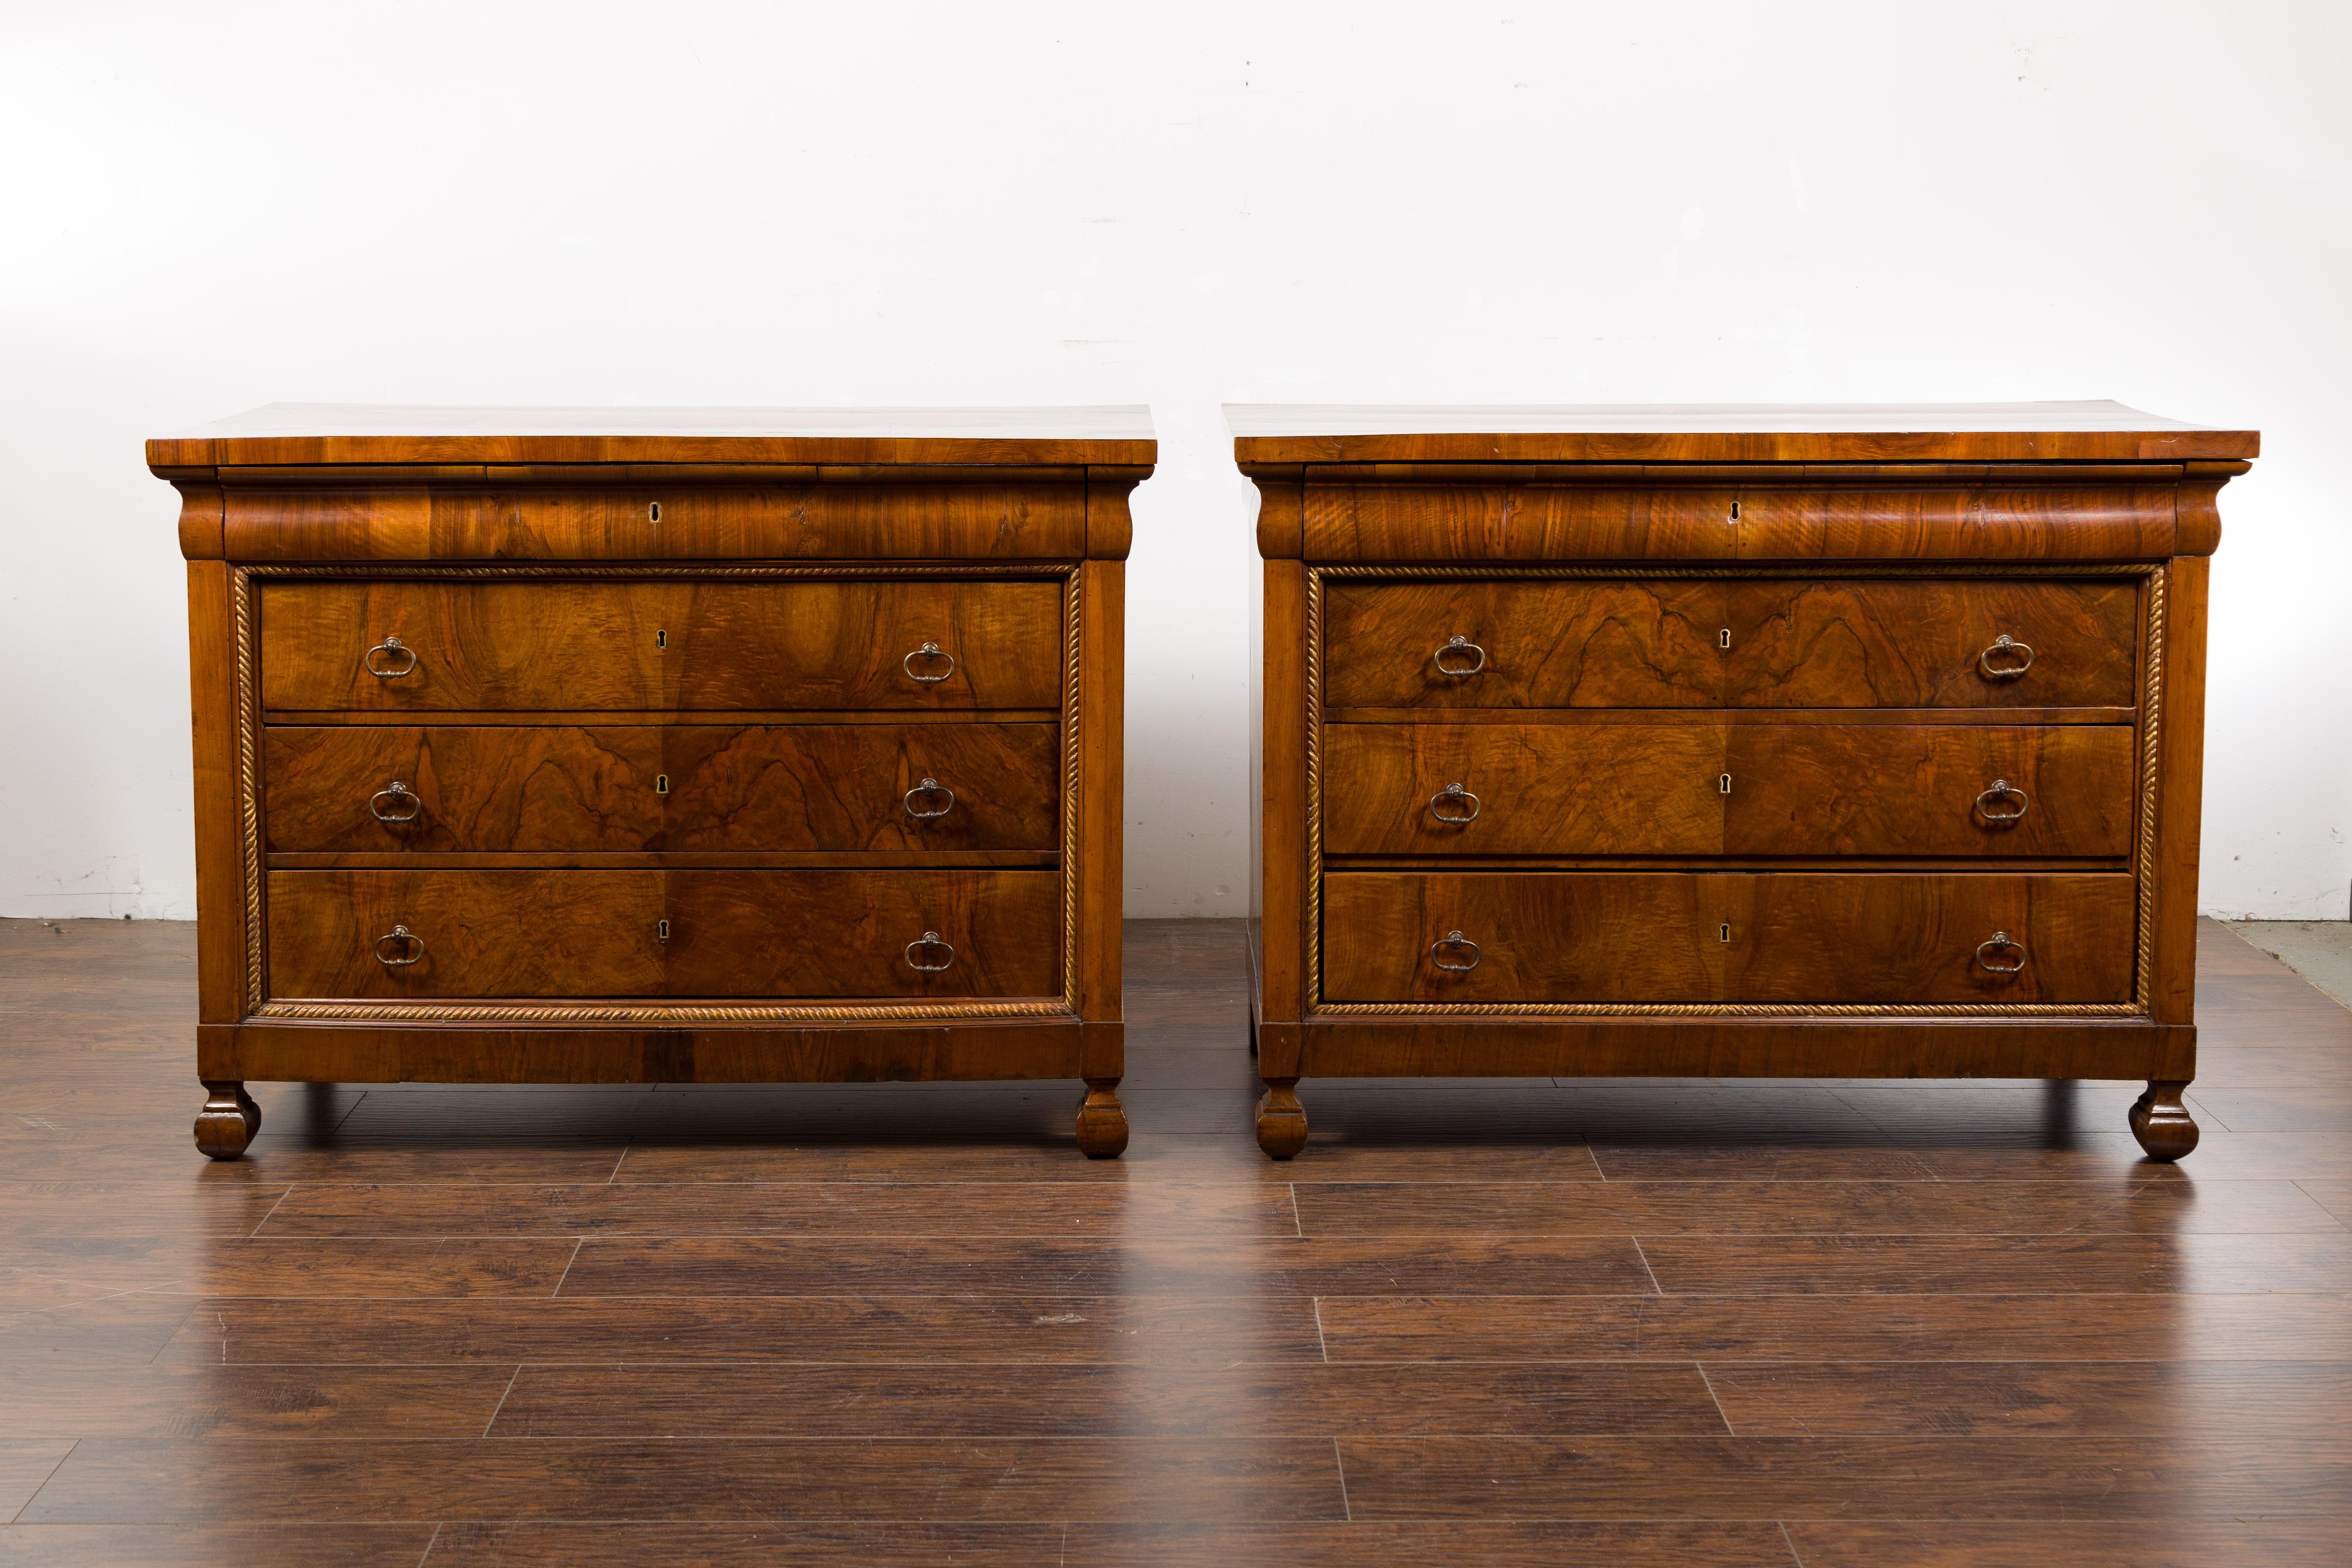 Carved Pair of Italian 18th Century Walnut Four-Drawer Commodes with Bookmatched Veneer For Sale